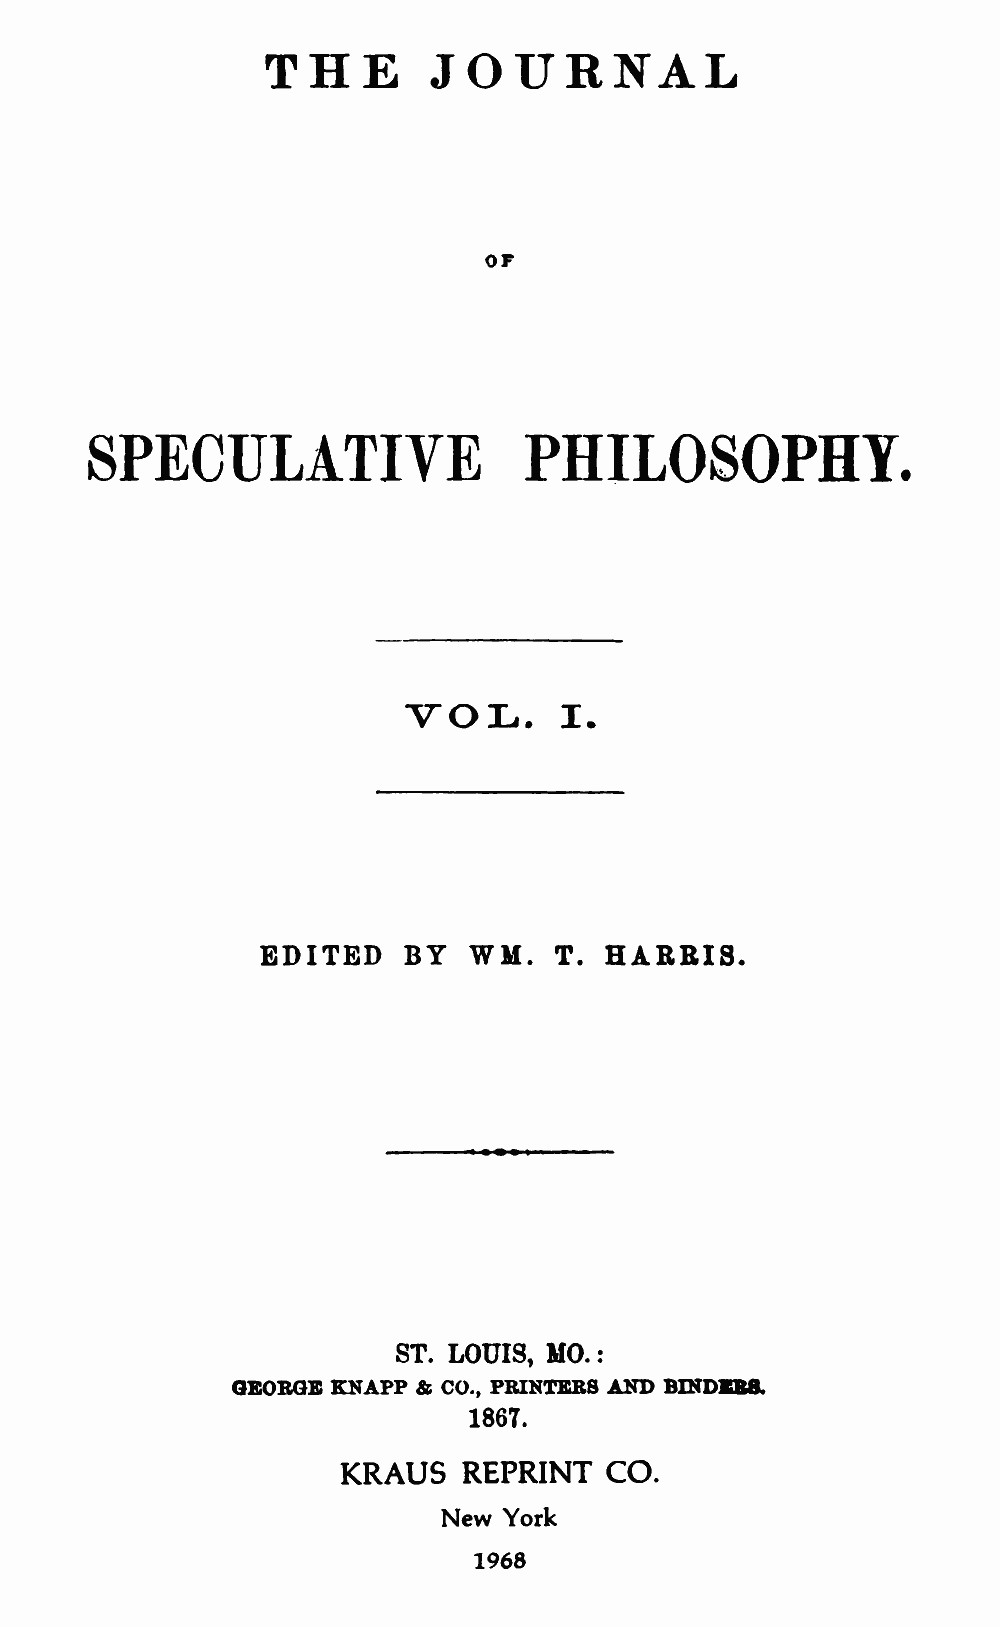 collected essays in speculative philosophy